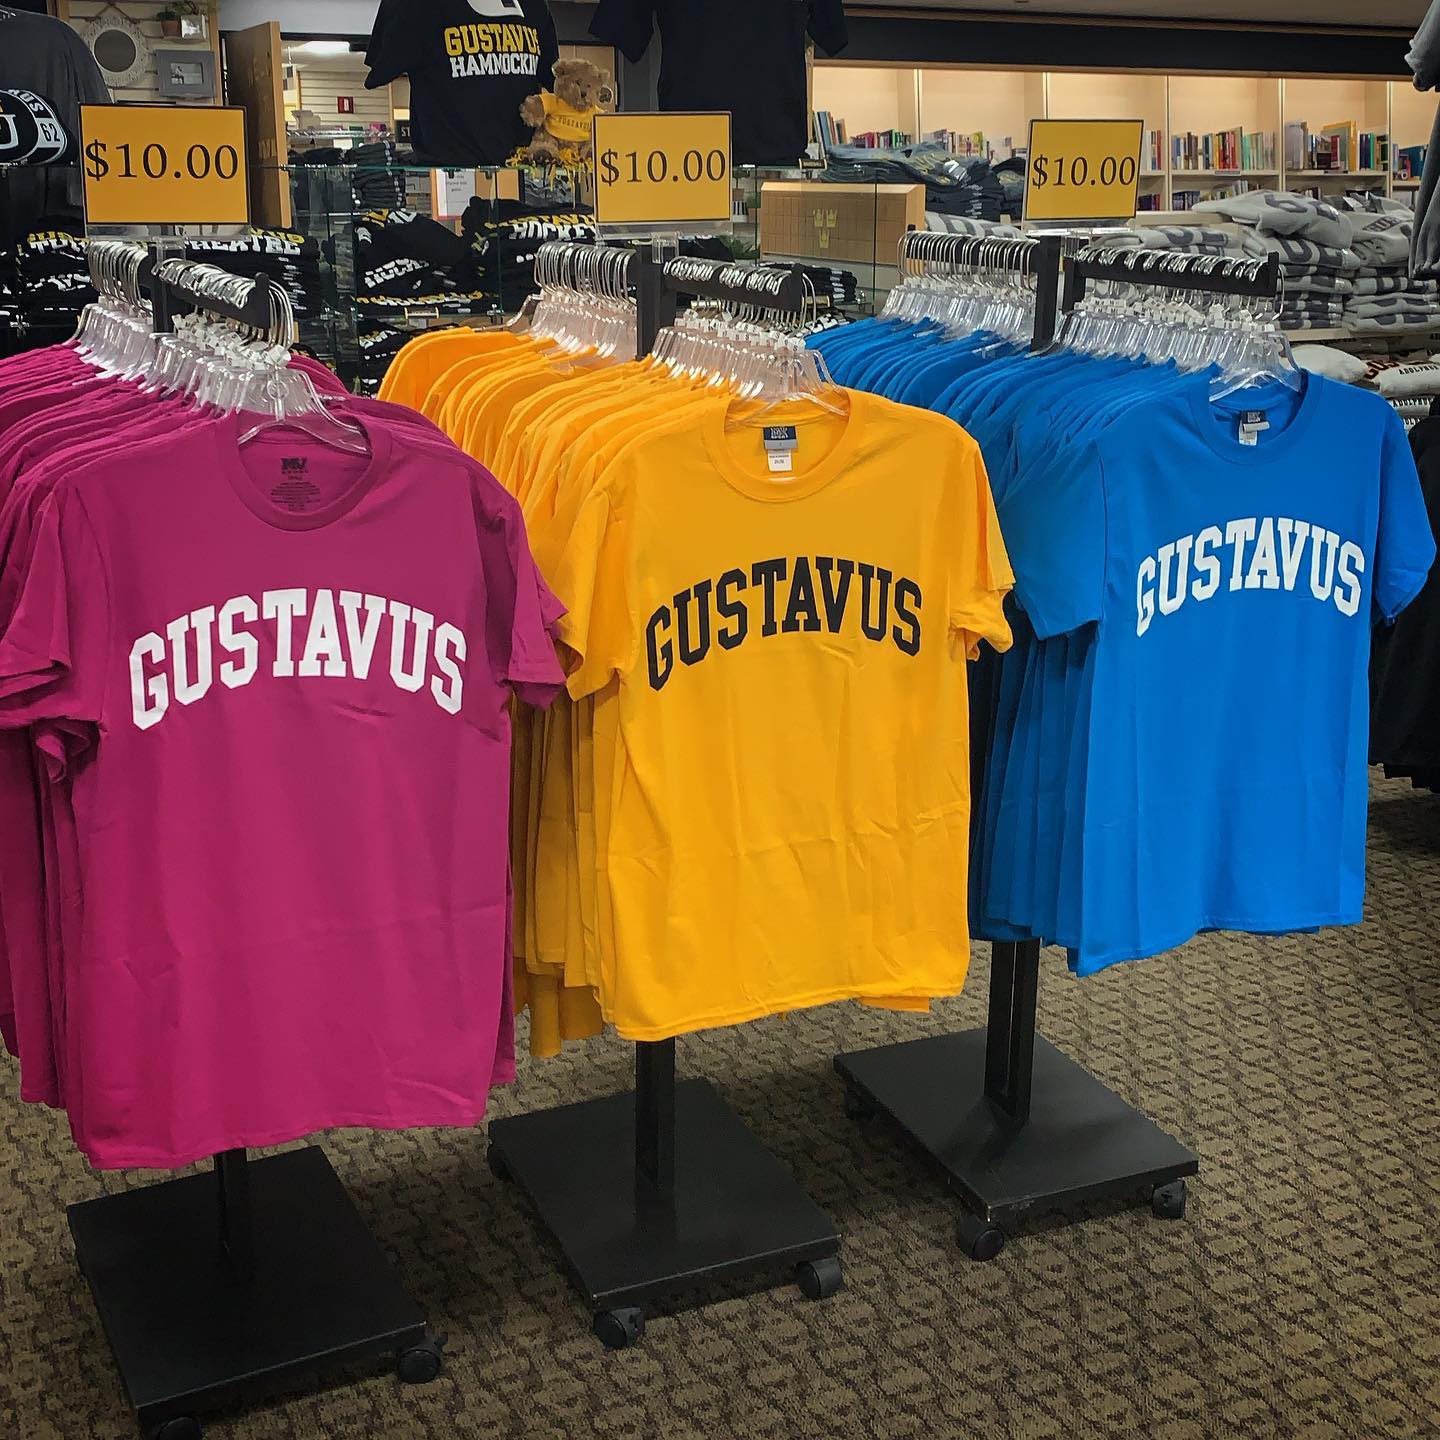 Photo of 3 t-shirts that say Gustavus, each priced at ten dollars.